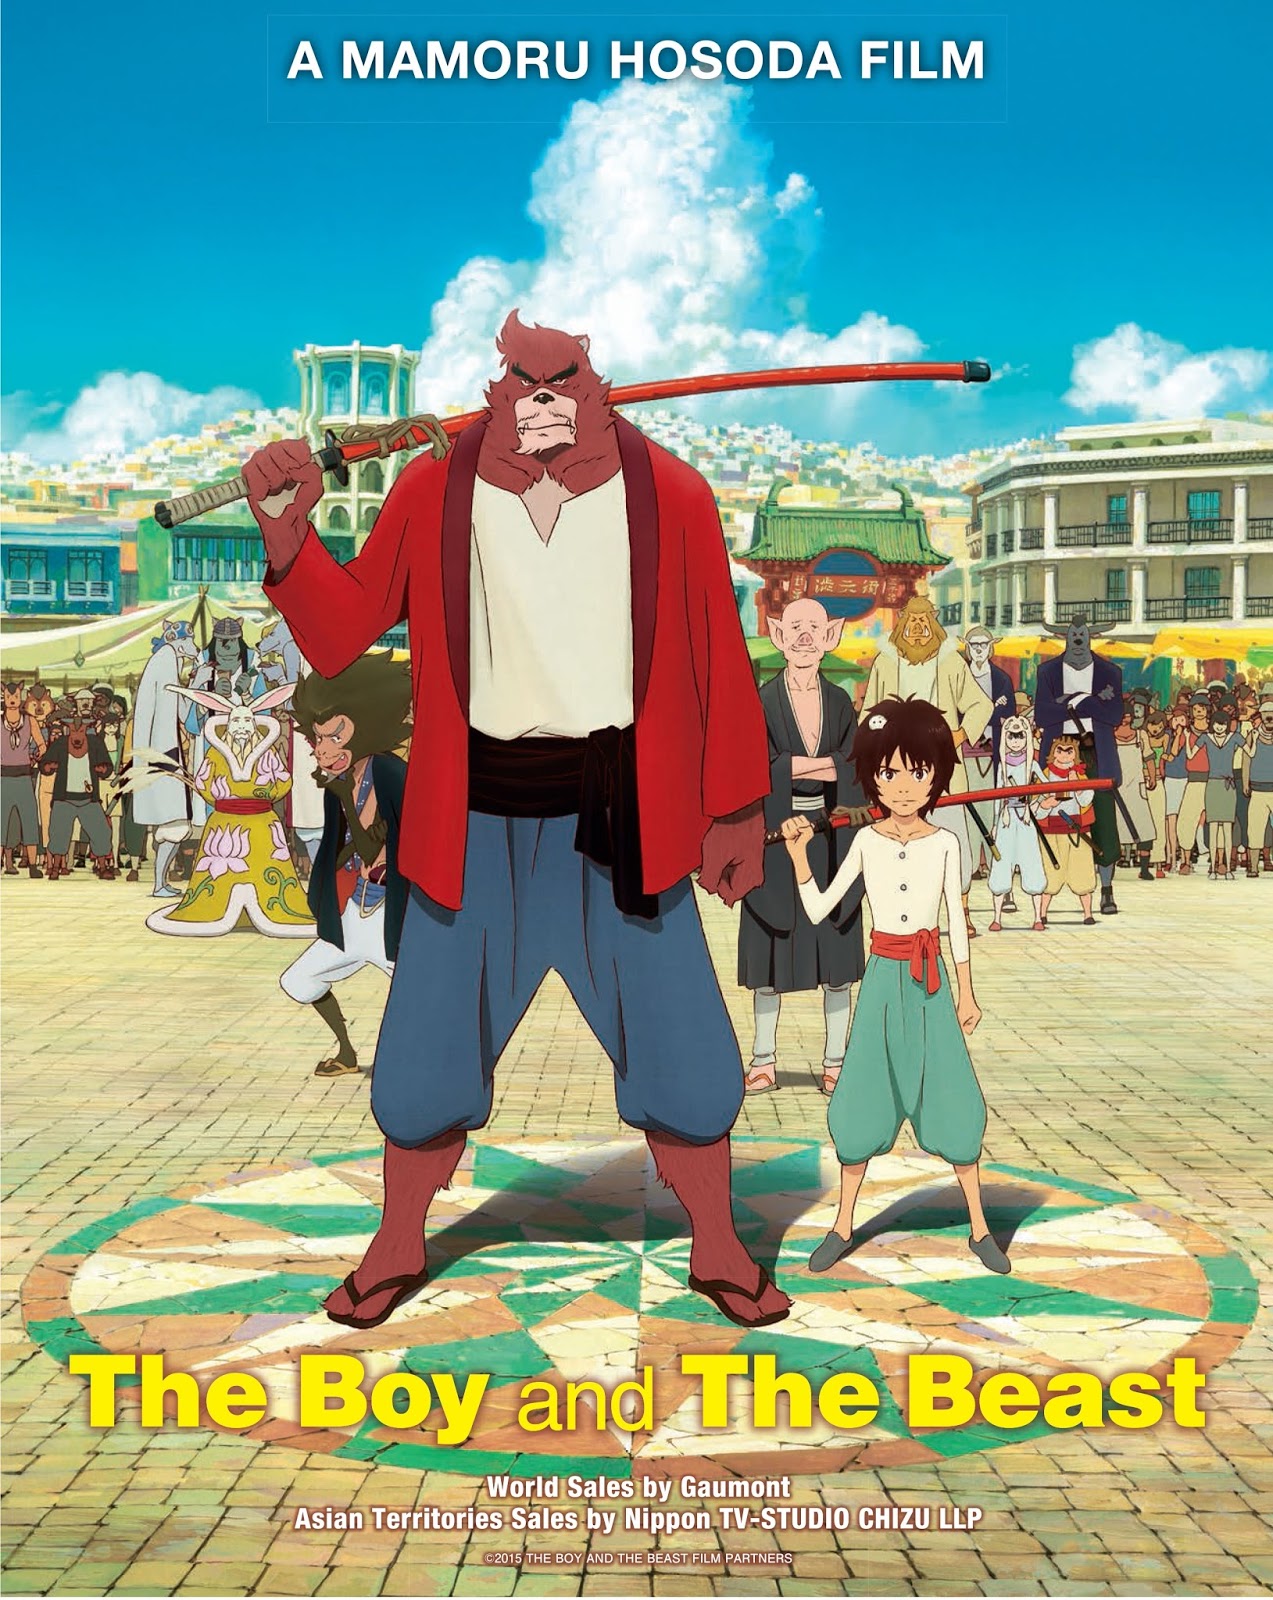 The Boy and the Beast 2015